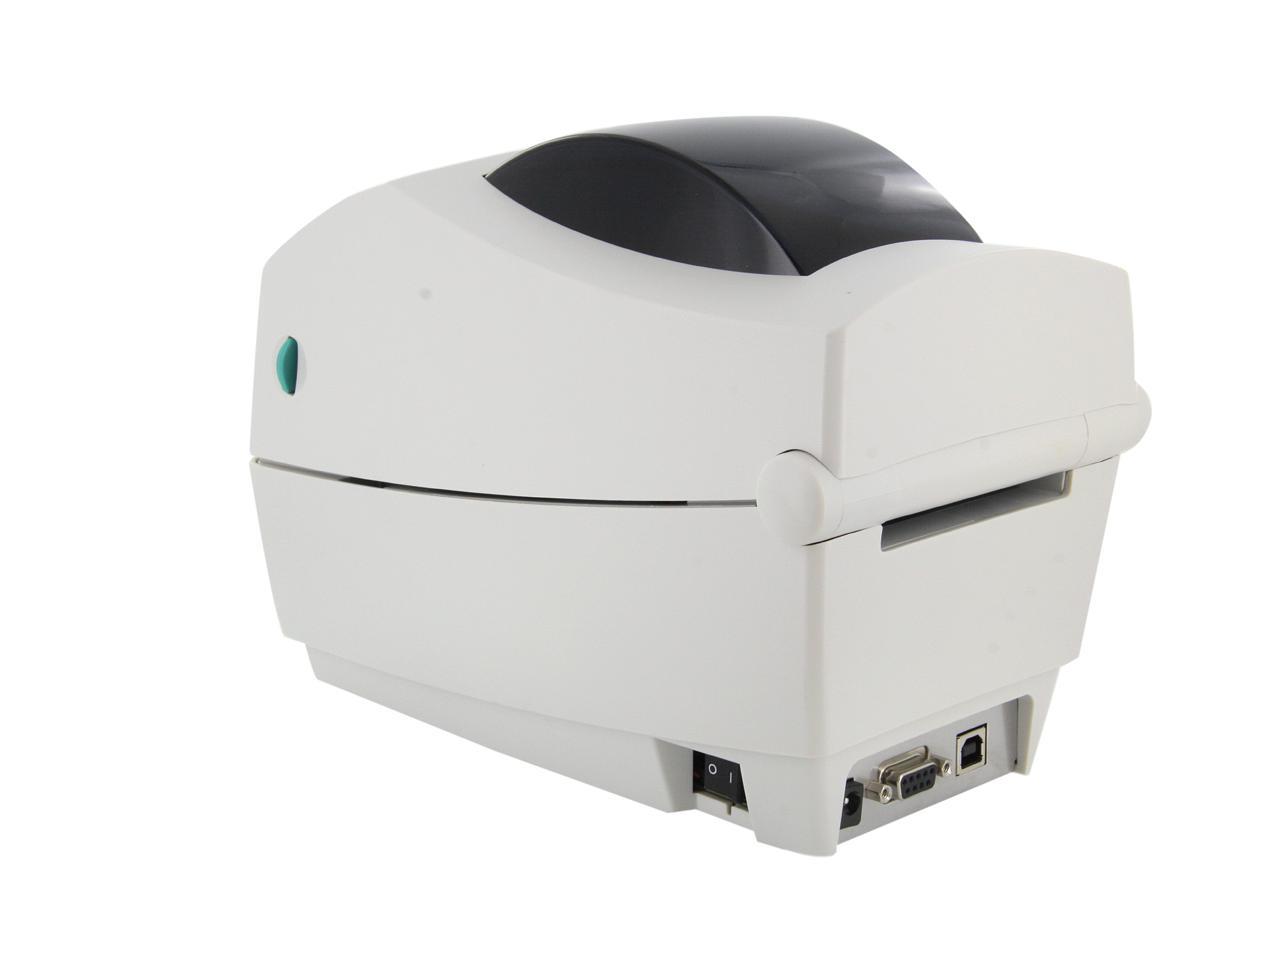 Zebra 282P-101510-000 TLP2824 Plus Direct Thermal Thermal Transfer Label Printer, Monochrome, 203 DPI, With USB and 10 100 Ethernet by Zebra - 2